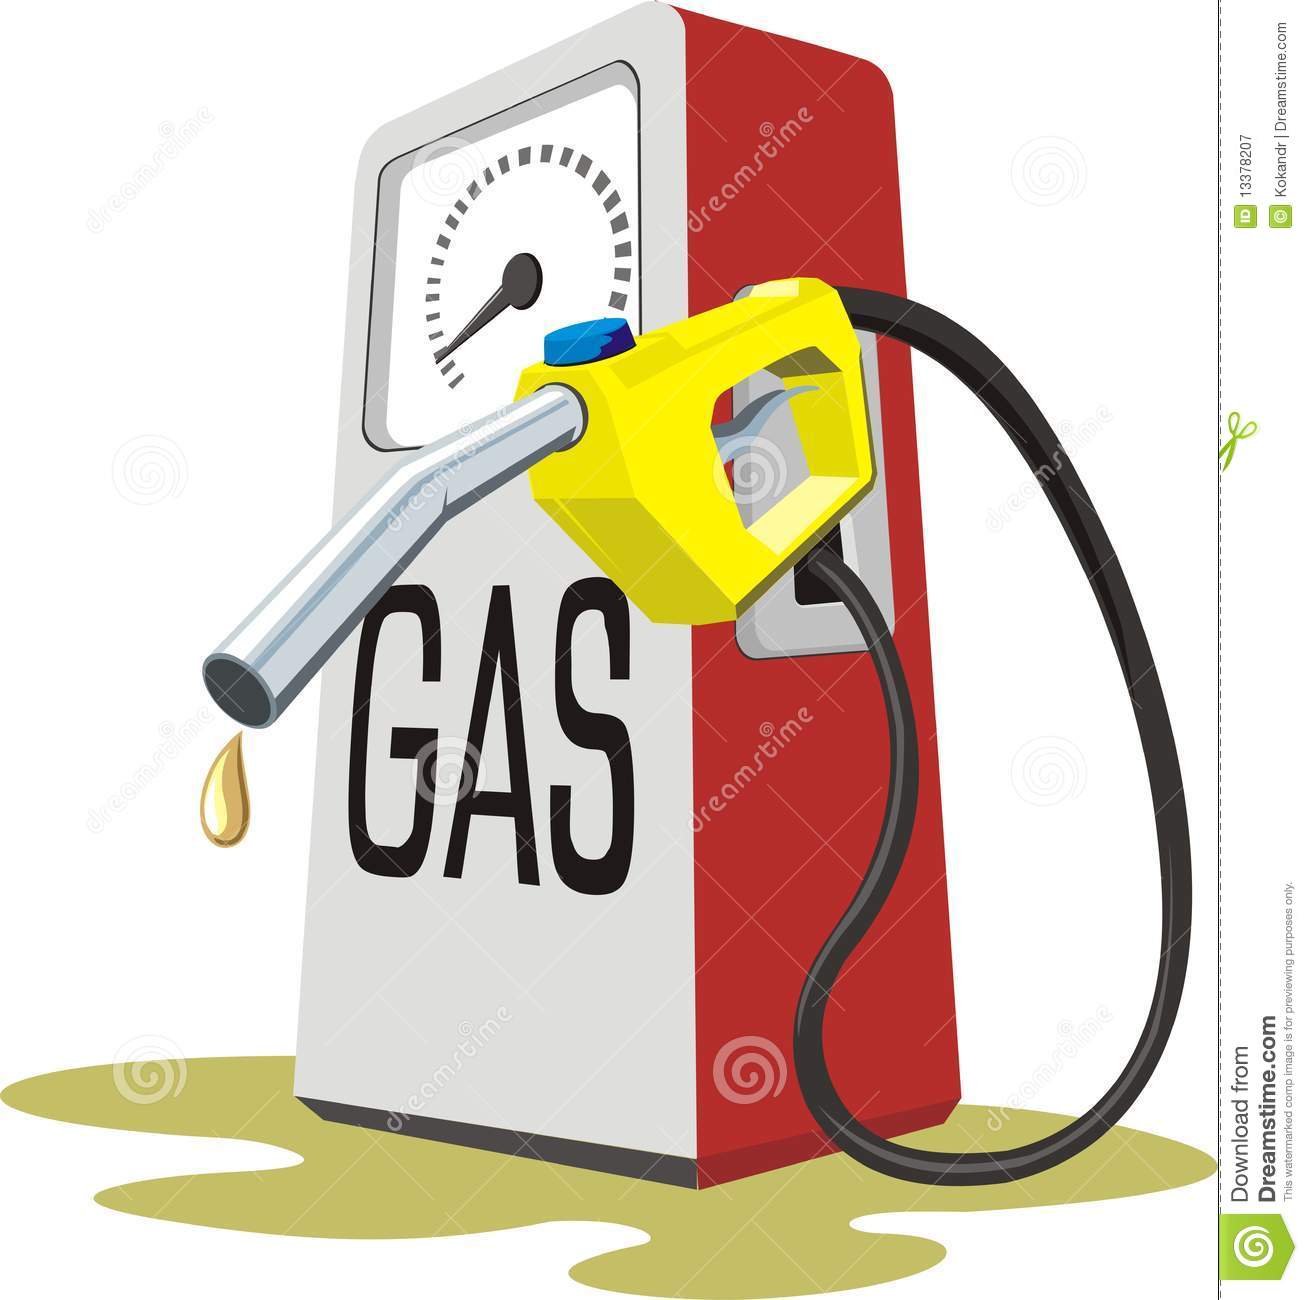 Gas clipart - Clipground